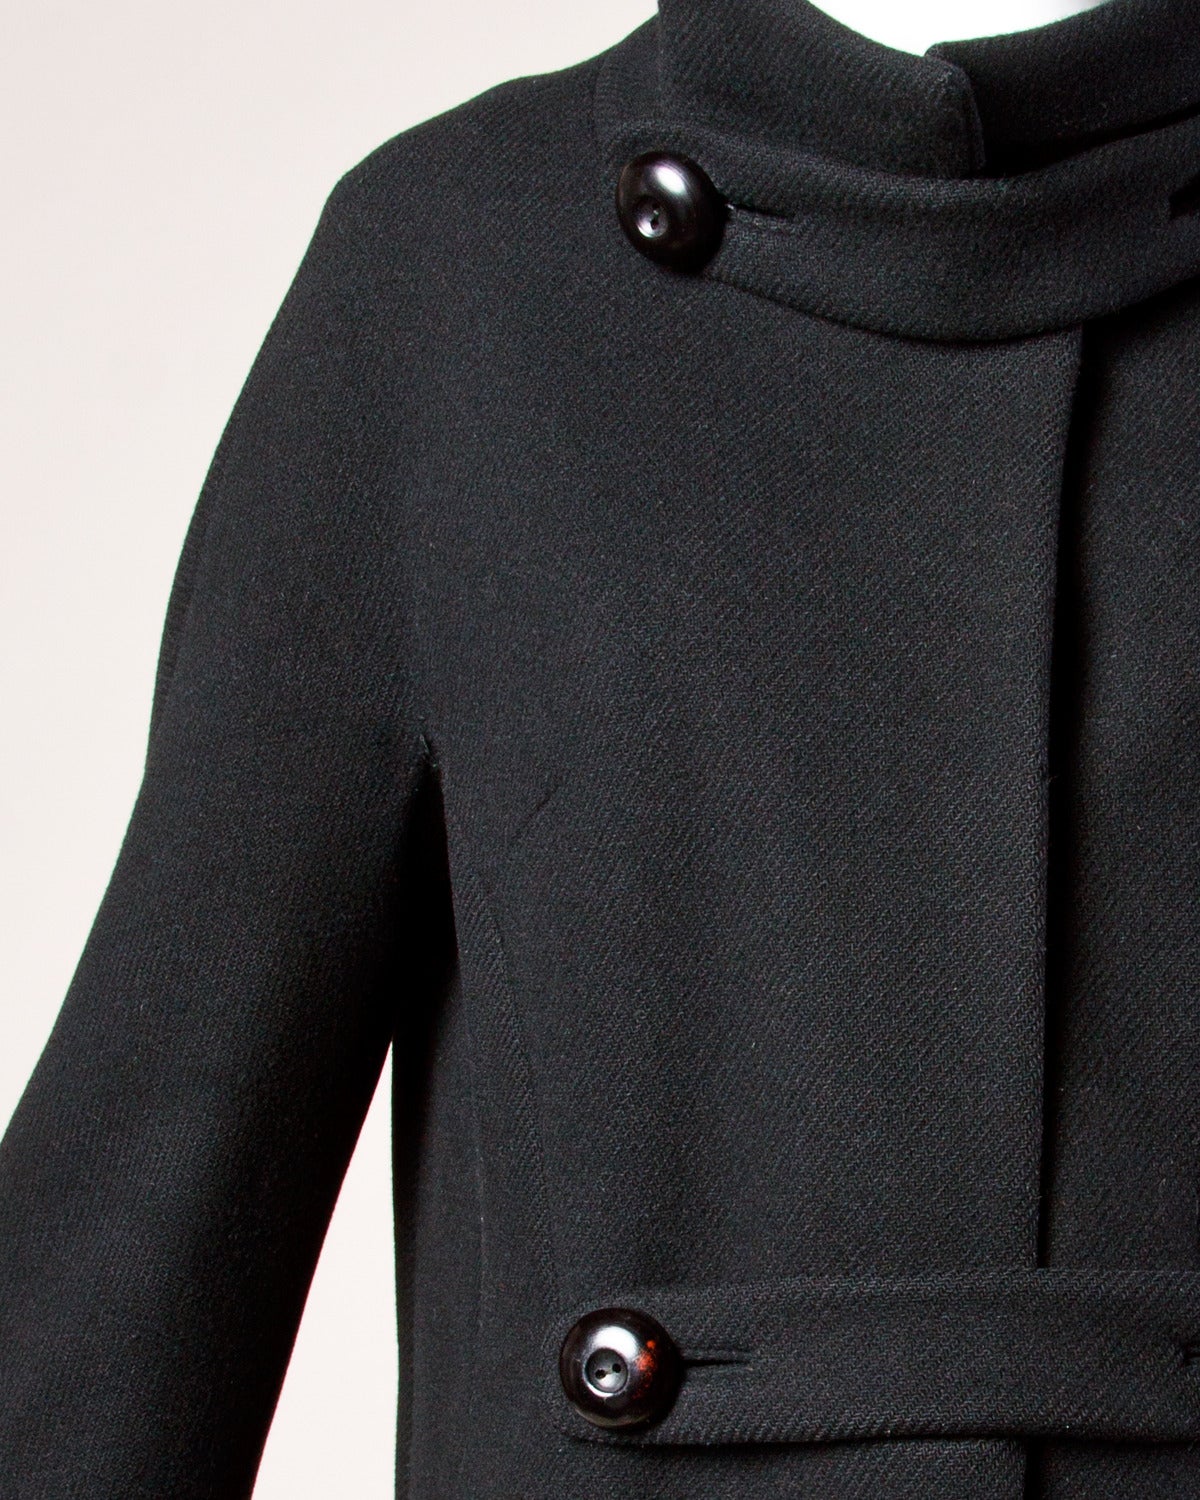 Stunning tailored heavy black wool mod coat by Louis Feraud. Amazing 1960s cut with oversized buttons and vintage silhouette. Fully lined in black satin.

Details:

Fully Lined
Hidden Side Pockets
Front Button and Snap Closure
Estimated Size: